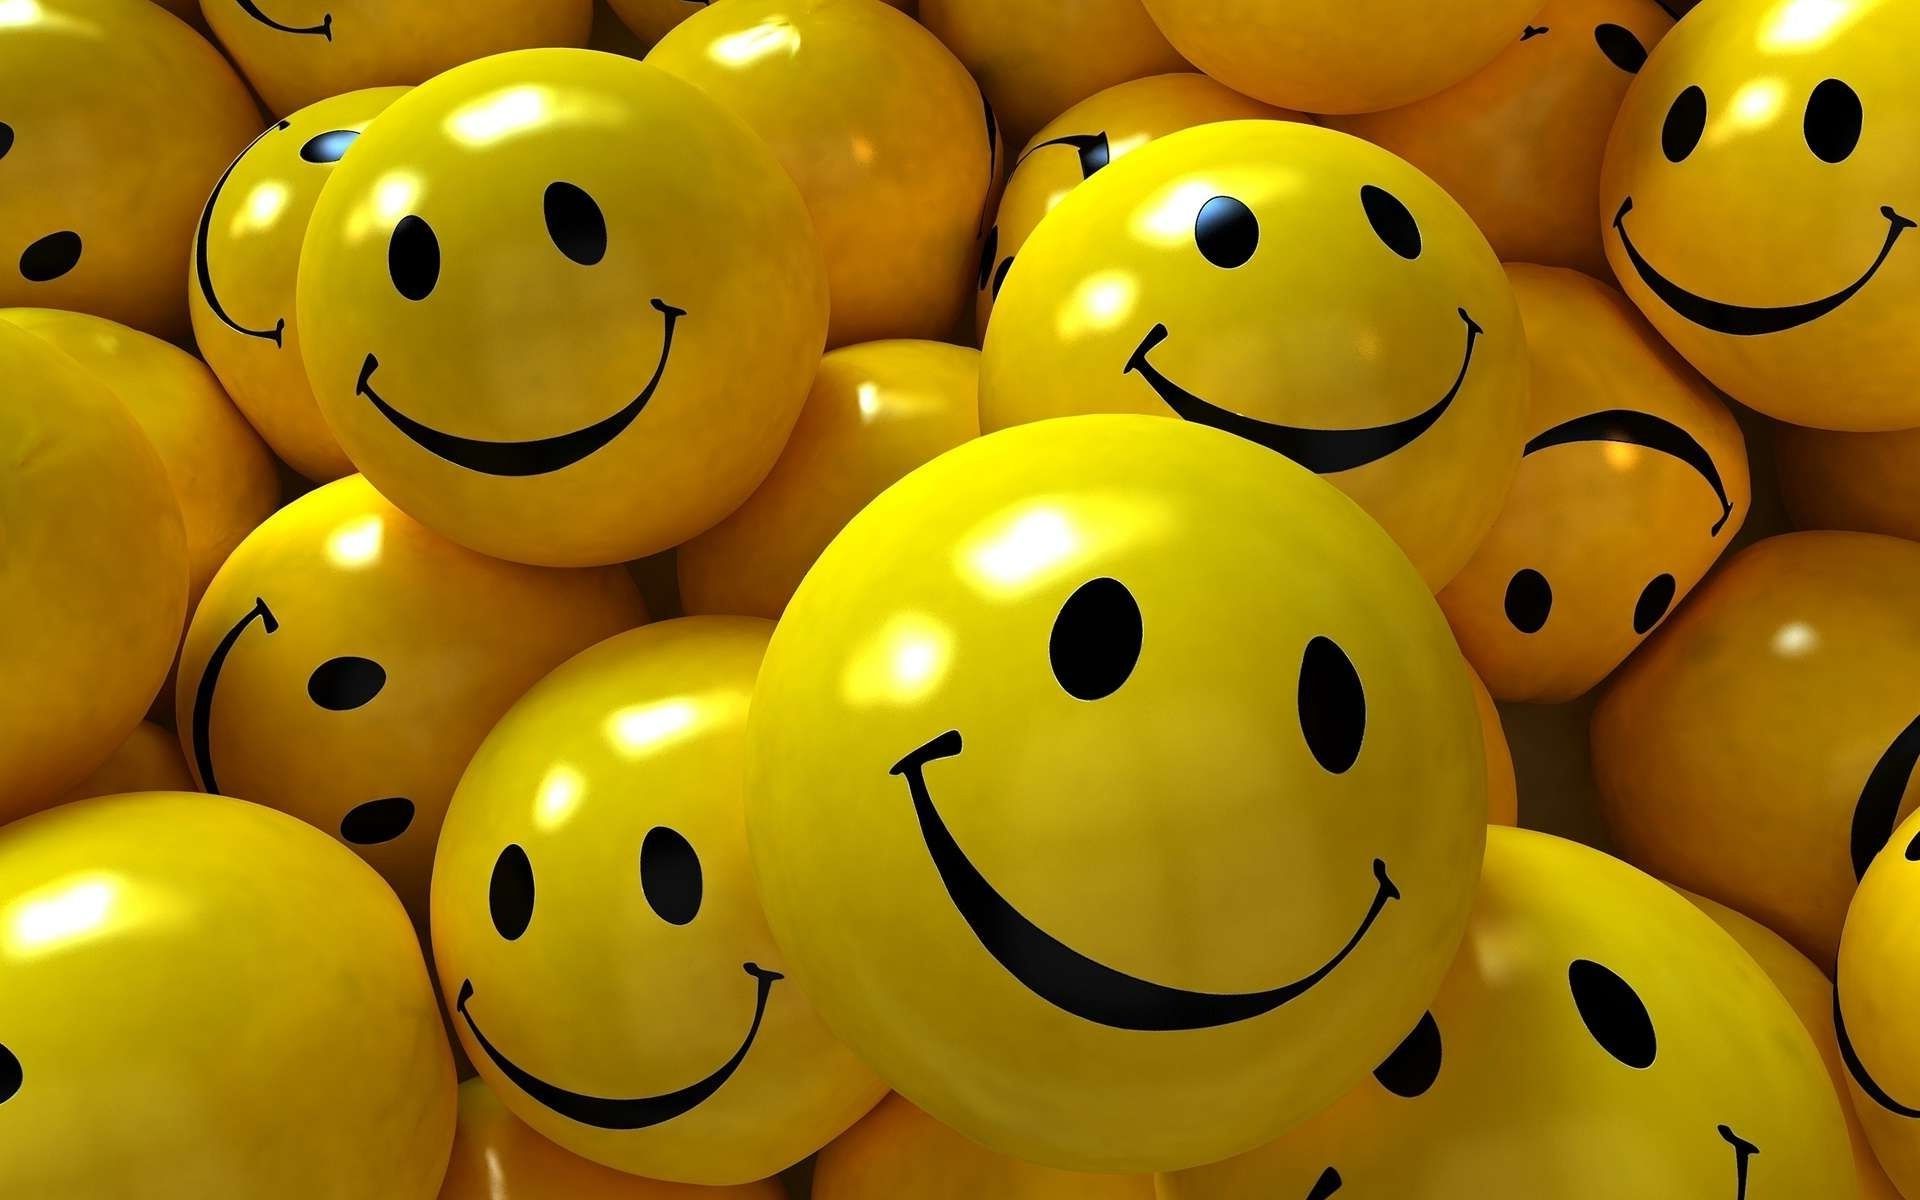 3d Smiley Faces Wallpaper Pictures To Pin